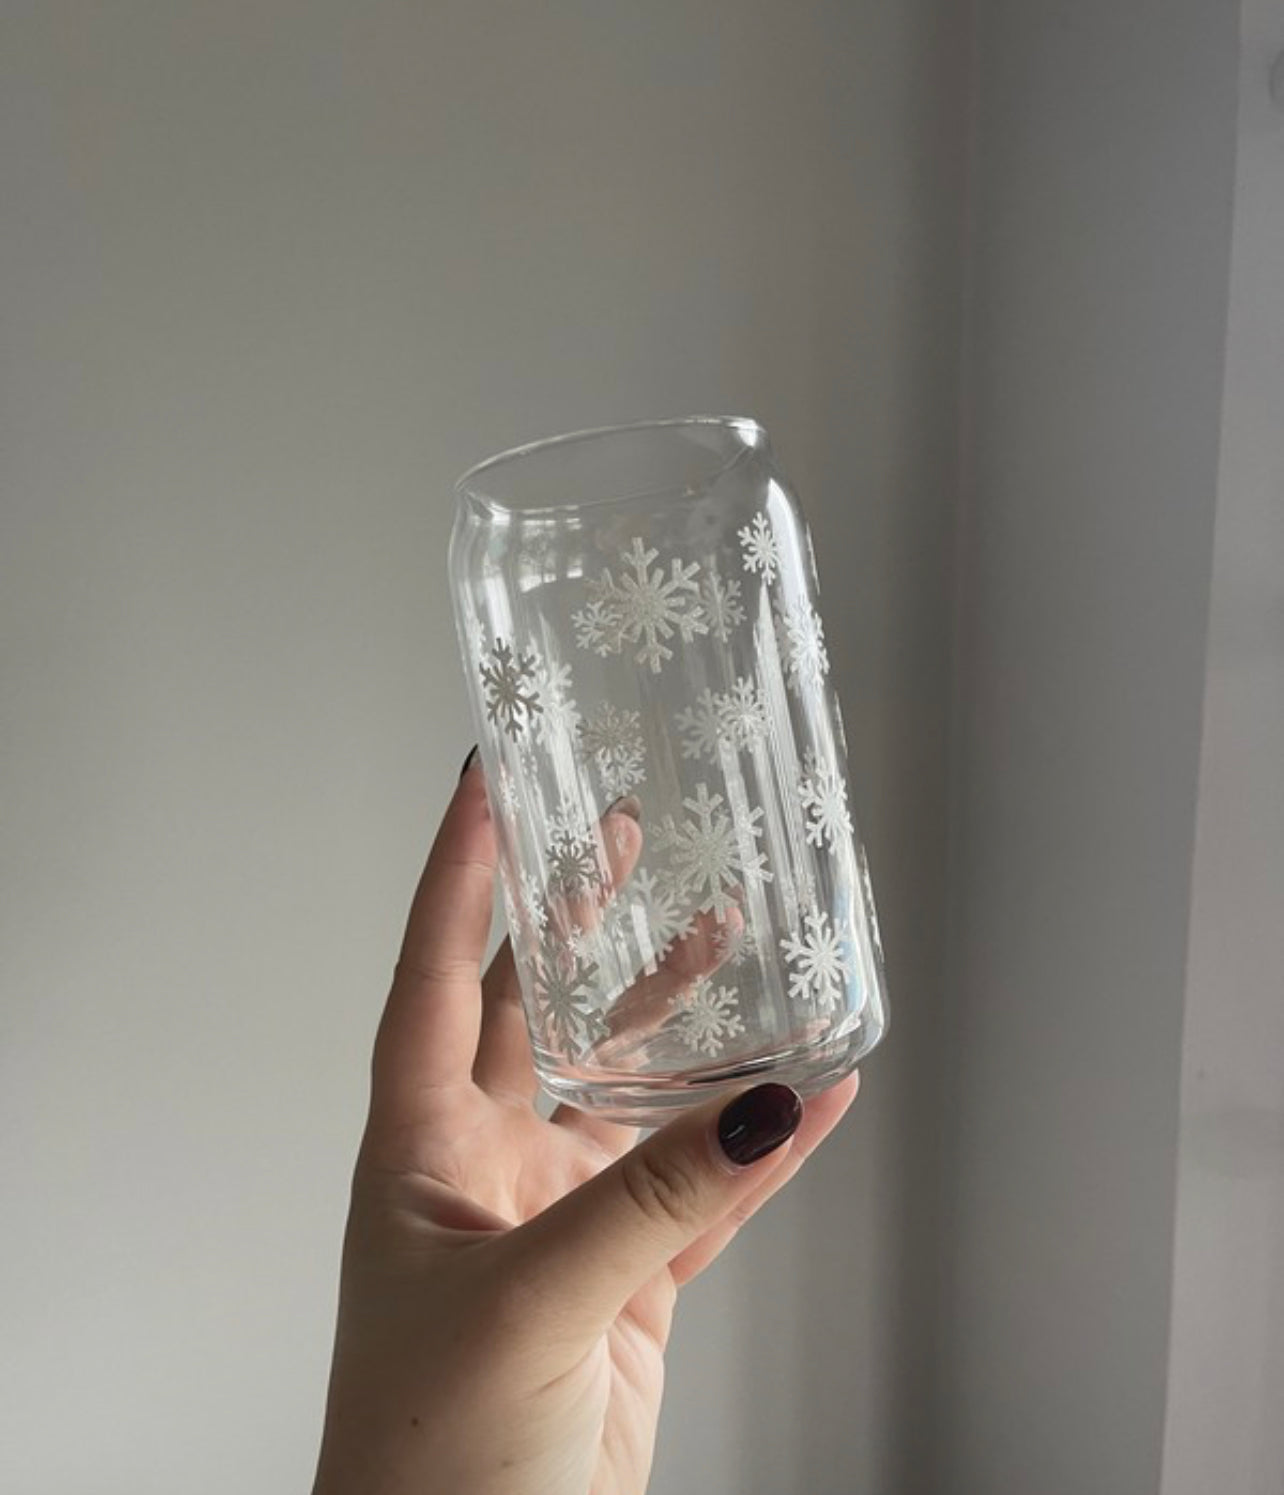 Snowflake Glass Cup